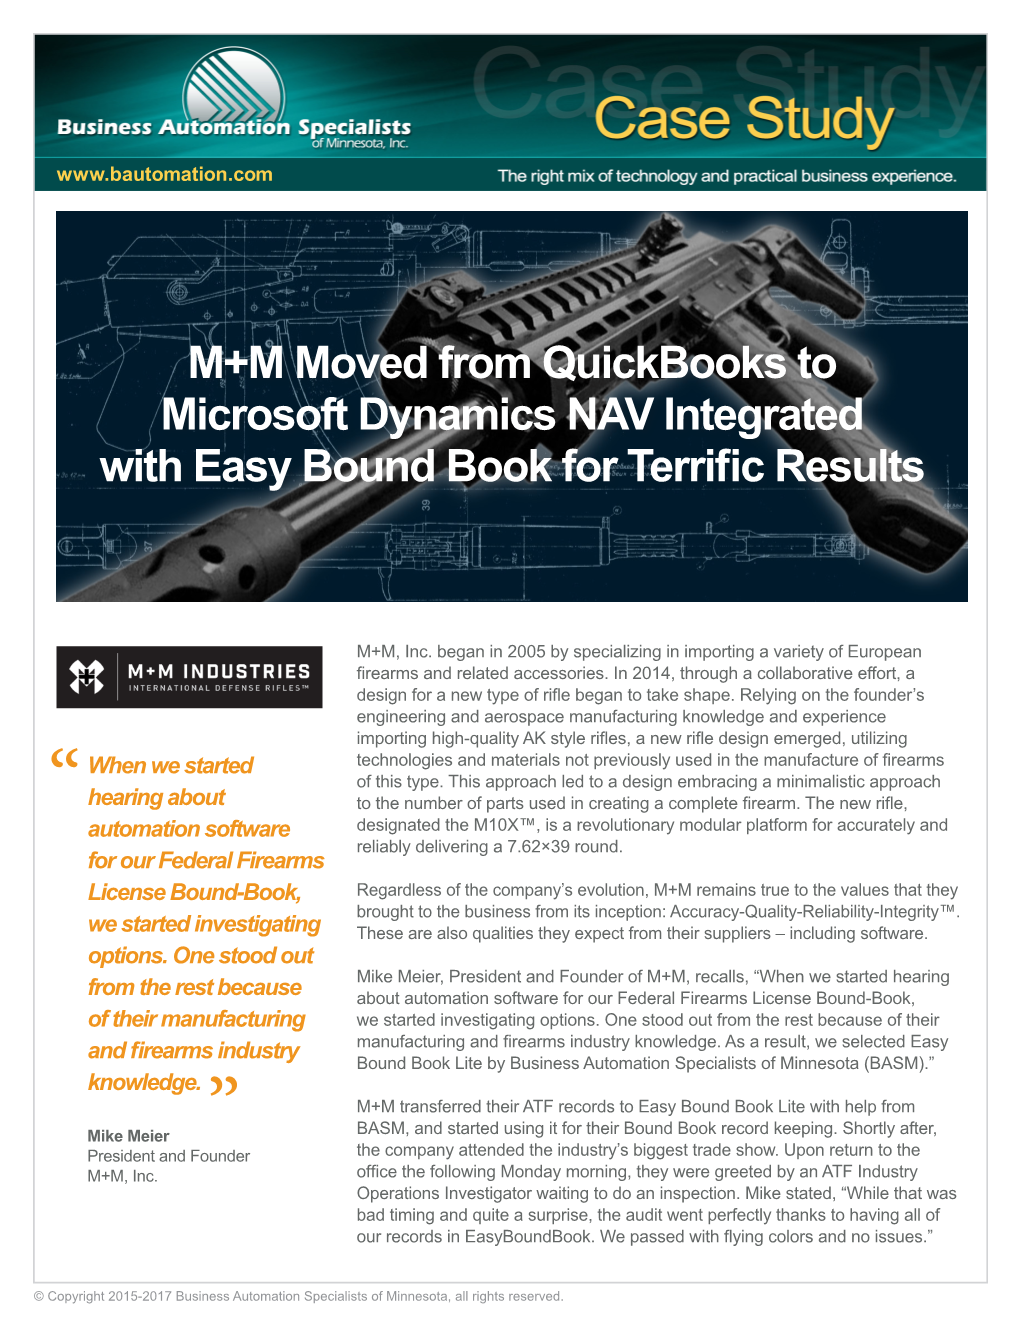 M+M Moved from Quickbooks to Microsoft Dynamics NAV Integrated with Easy Bound Book for Terrific Results